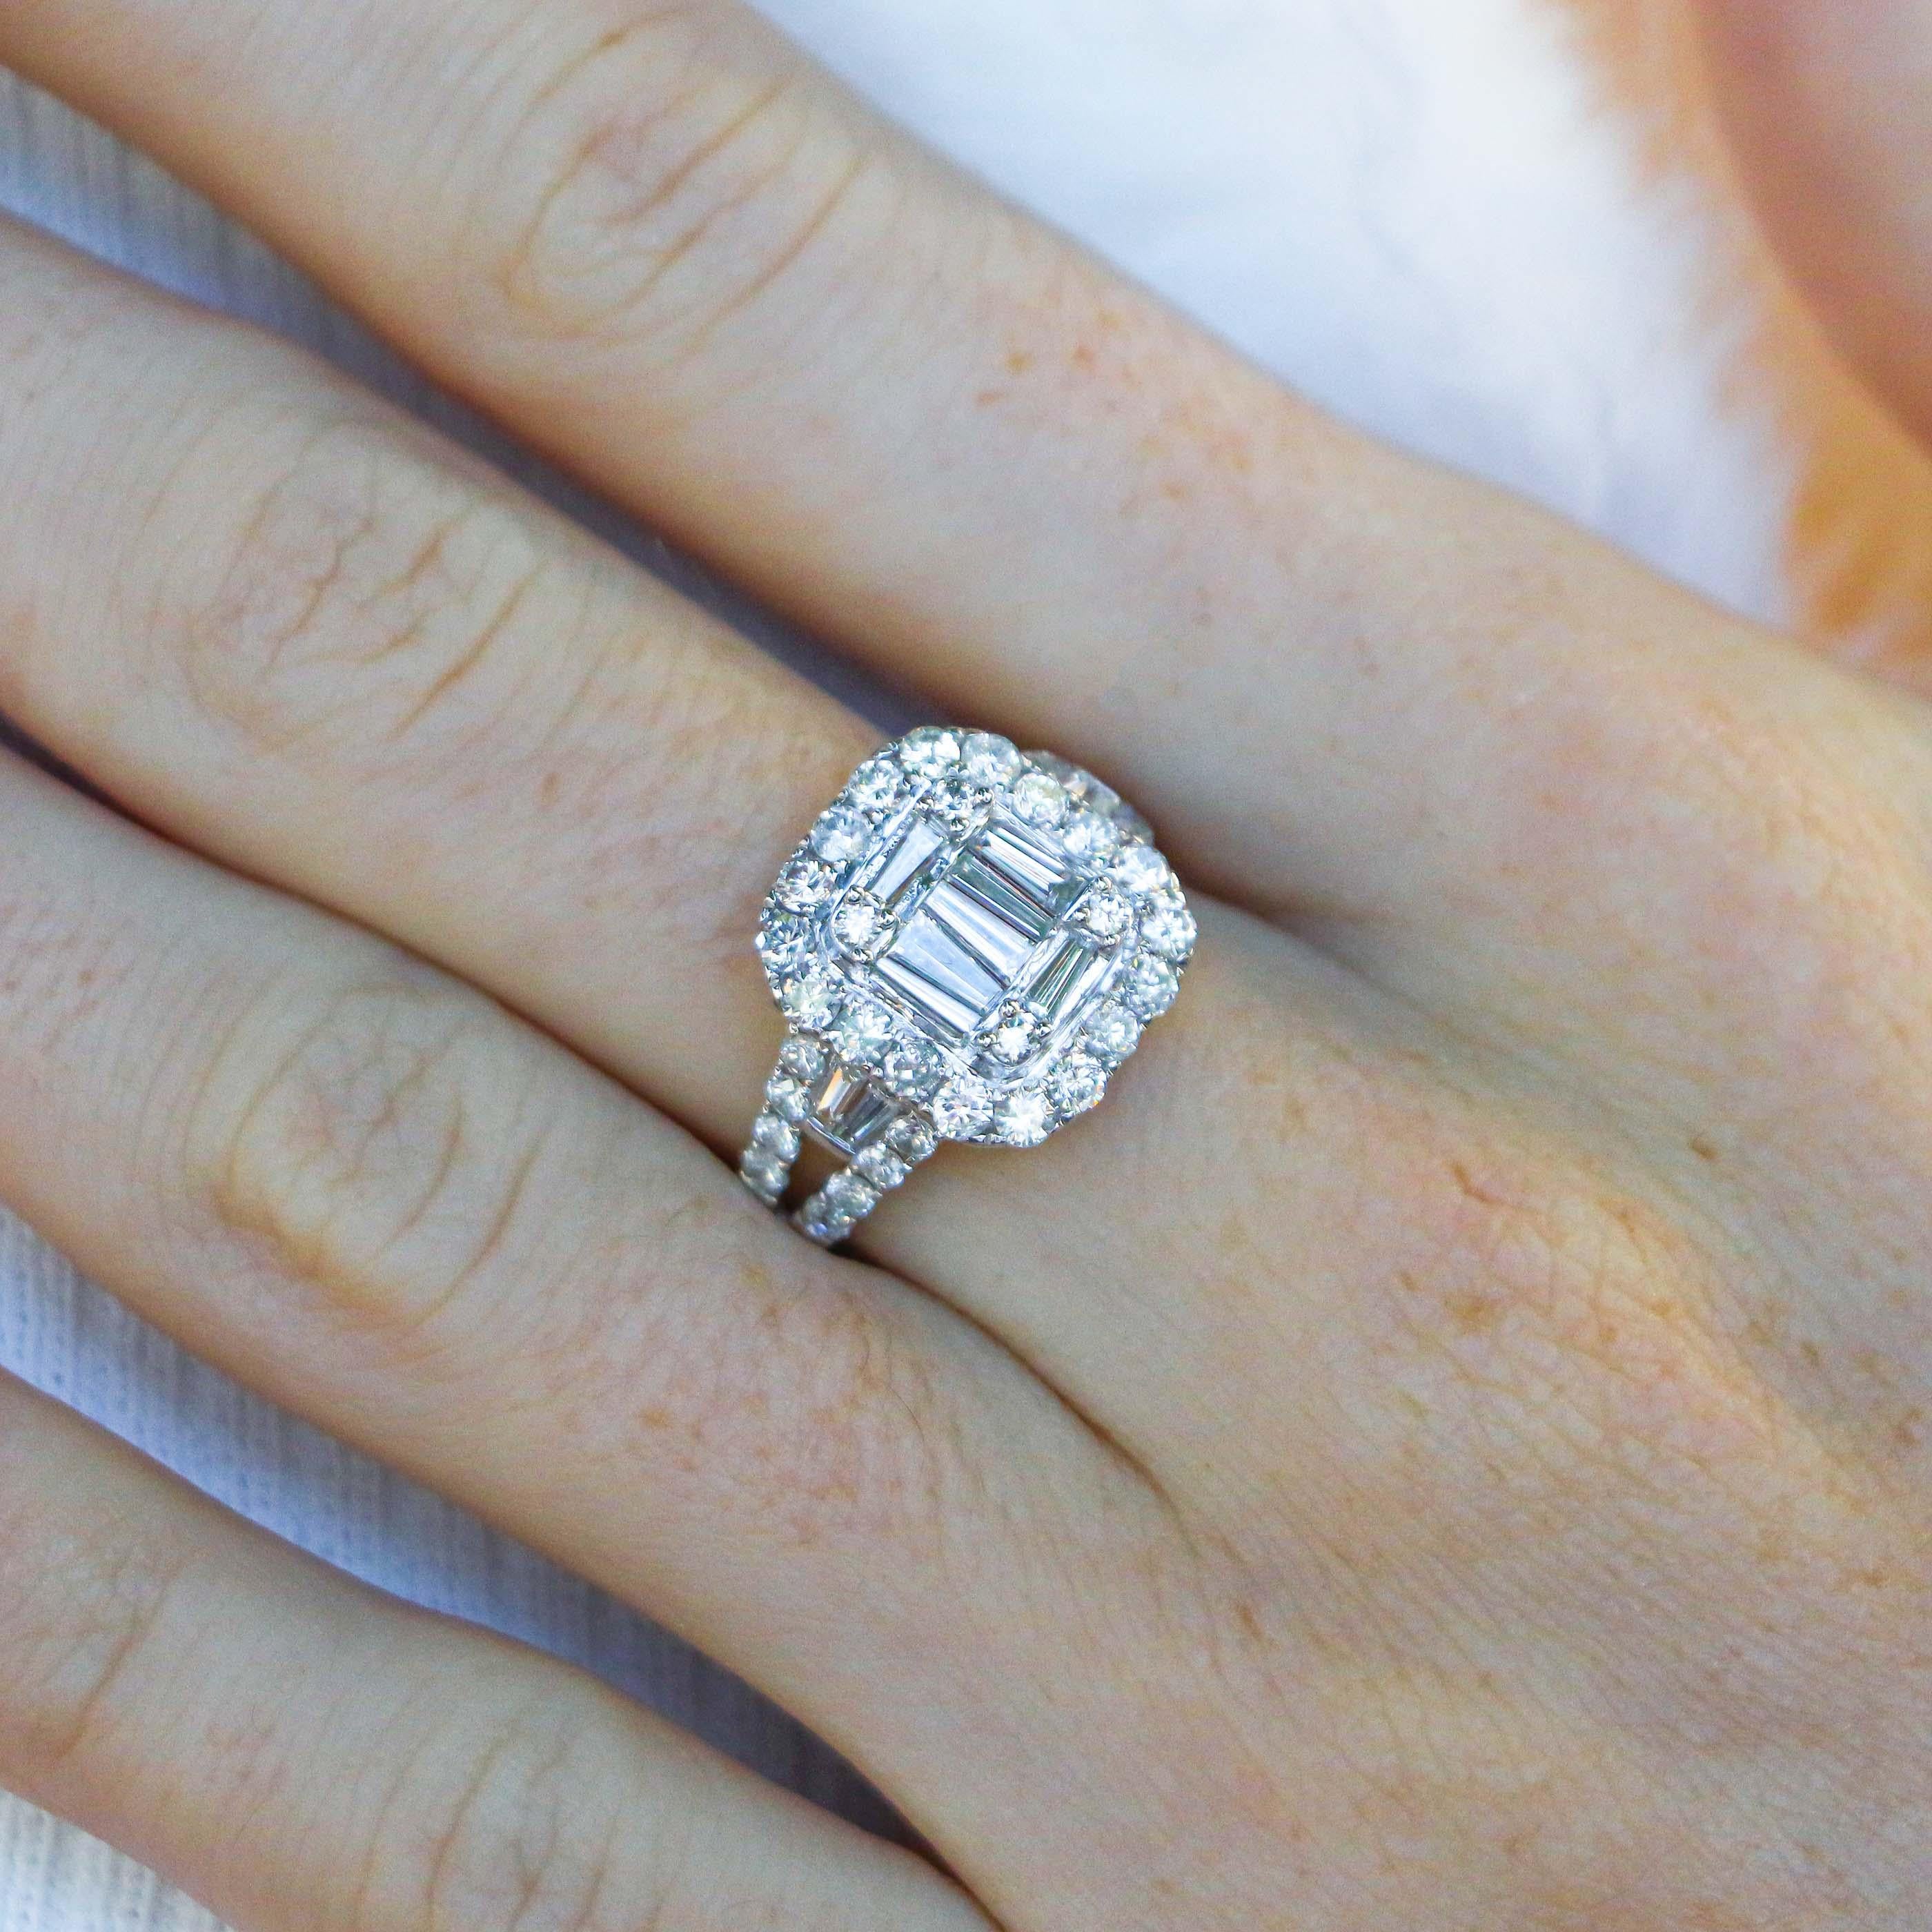 how much is a diamond cluster ring worth